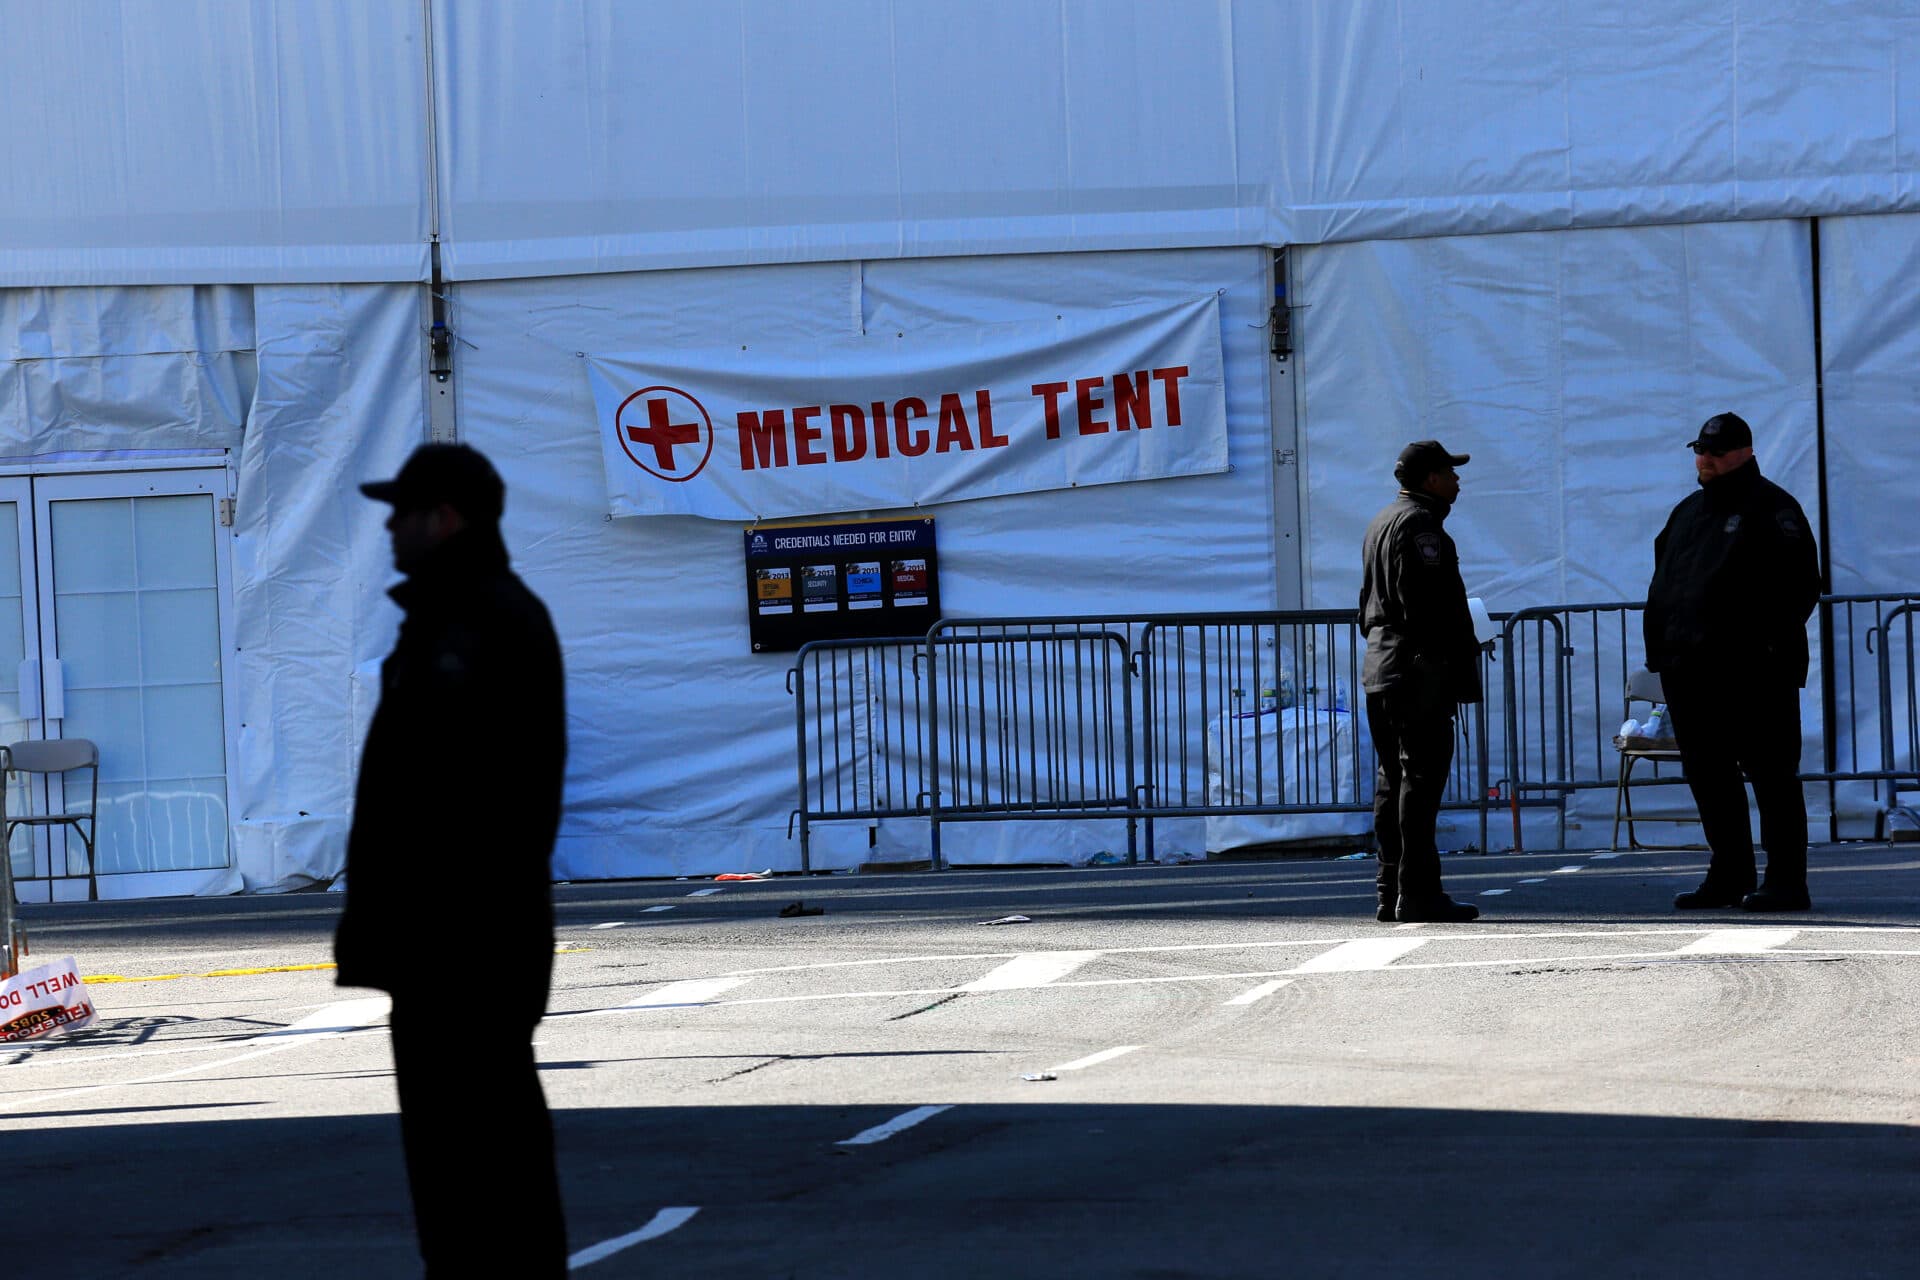 The medical tent on Boylston Street with police out front the day after the bombings. (David L Ryan/The Boston Globe via Getty Images)